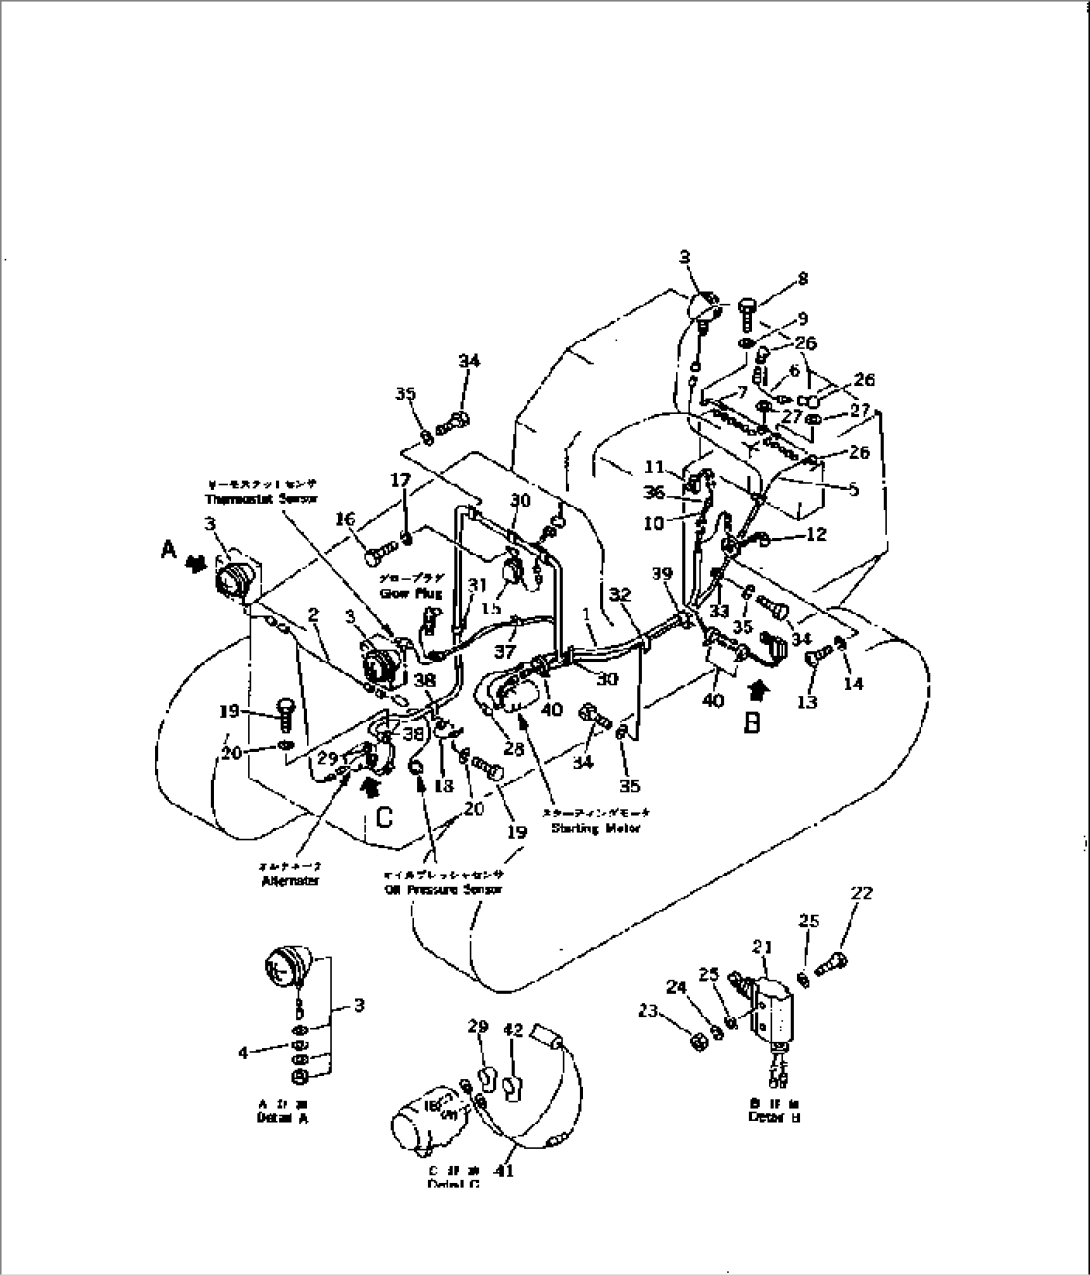 ELECTRICAL SYSTEM (FOR 25A ALTERNATOR)